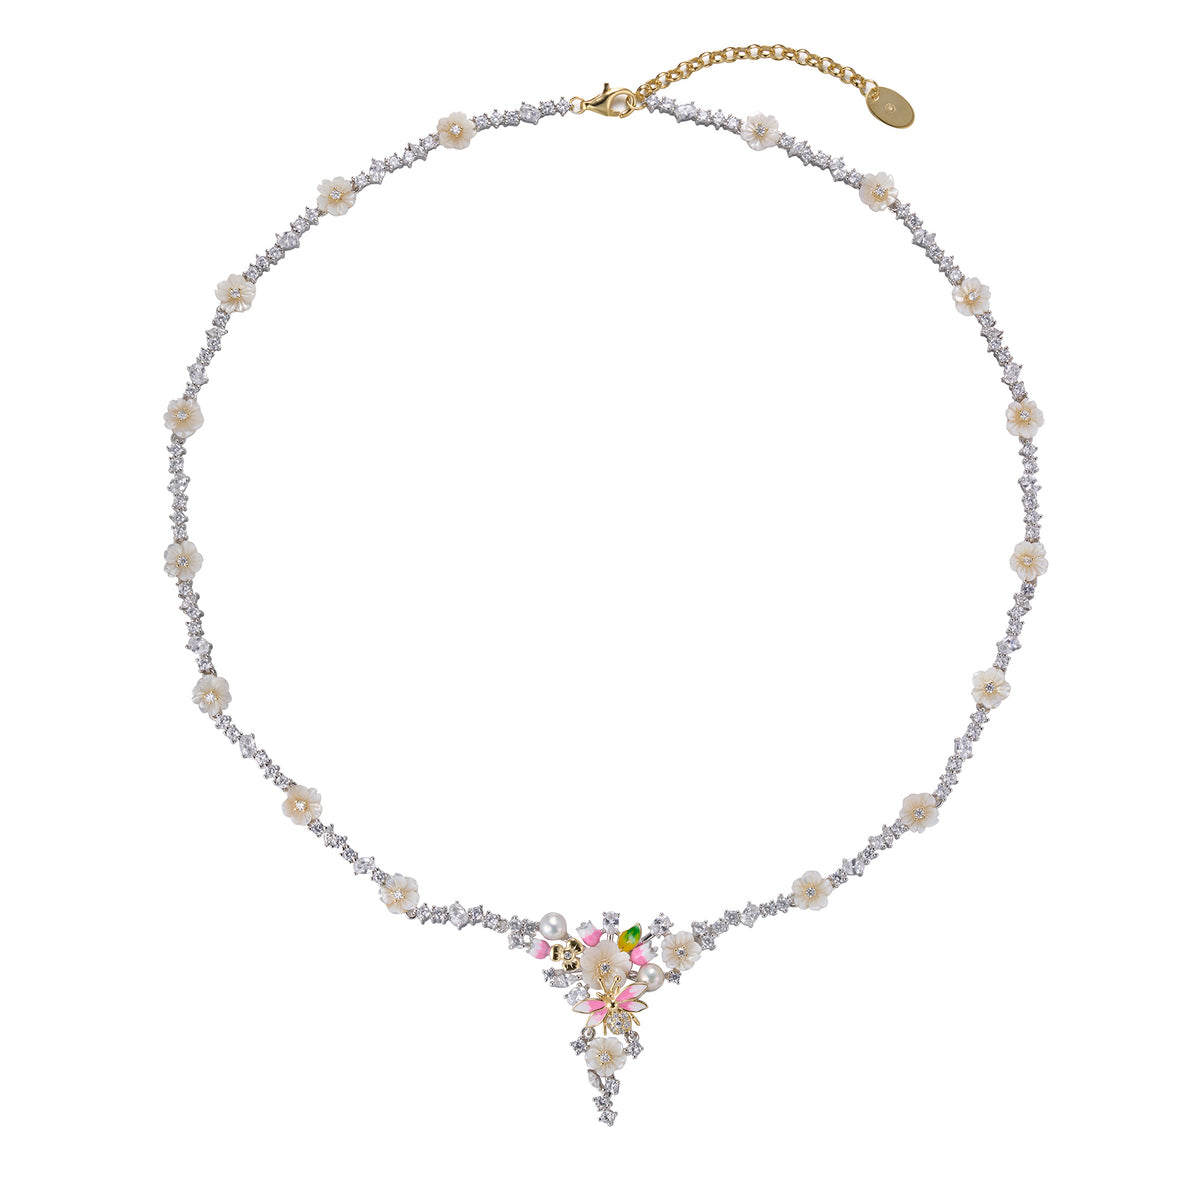 A silver gold plated necklace with pearls, shell flowers and a pink butterfly charm.